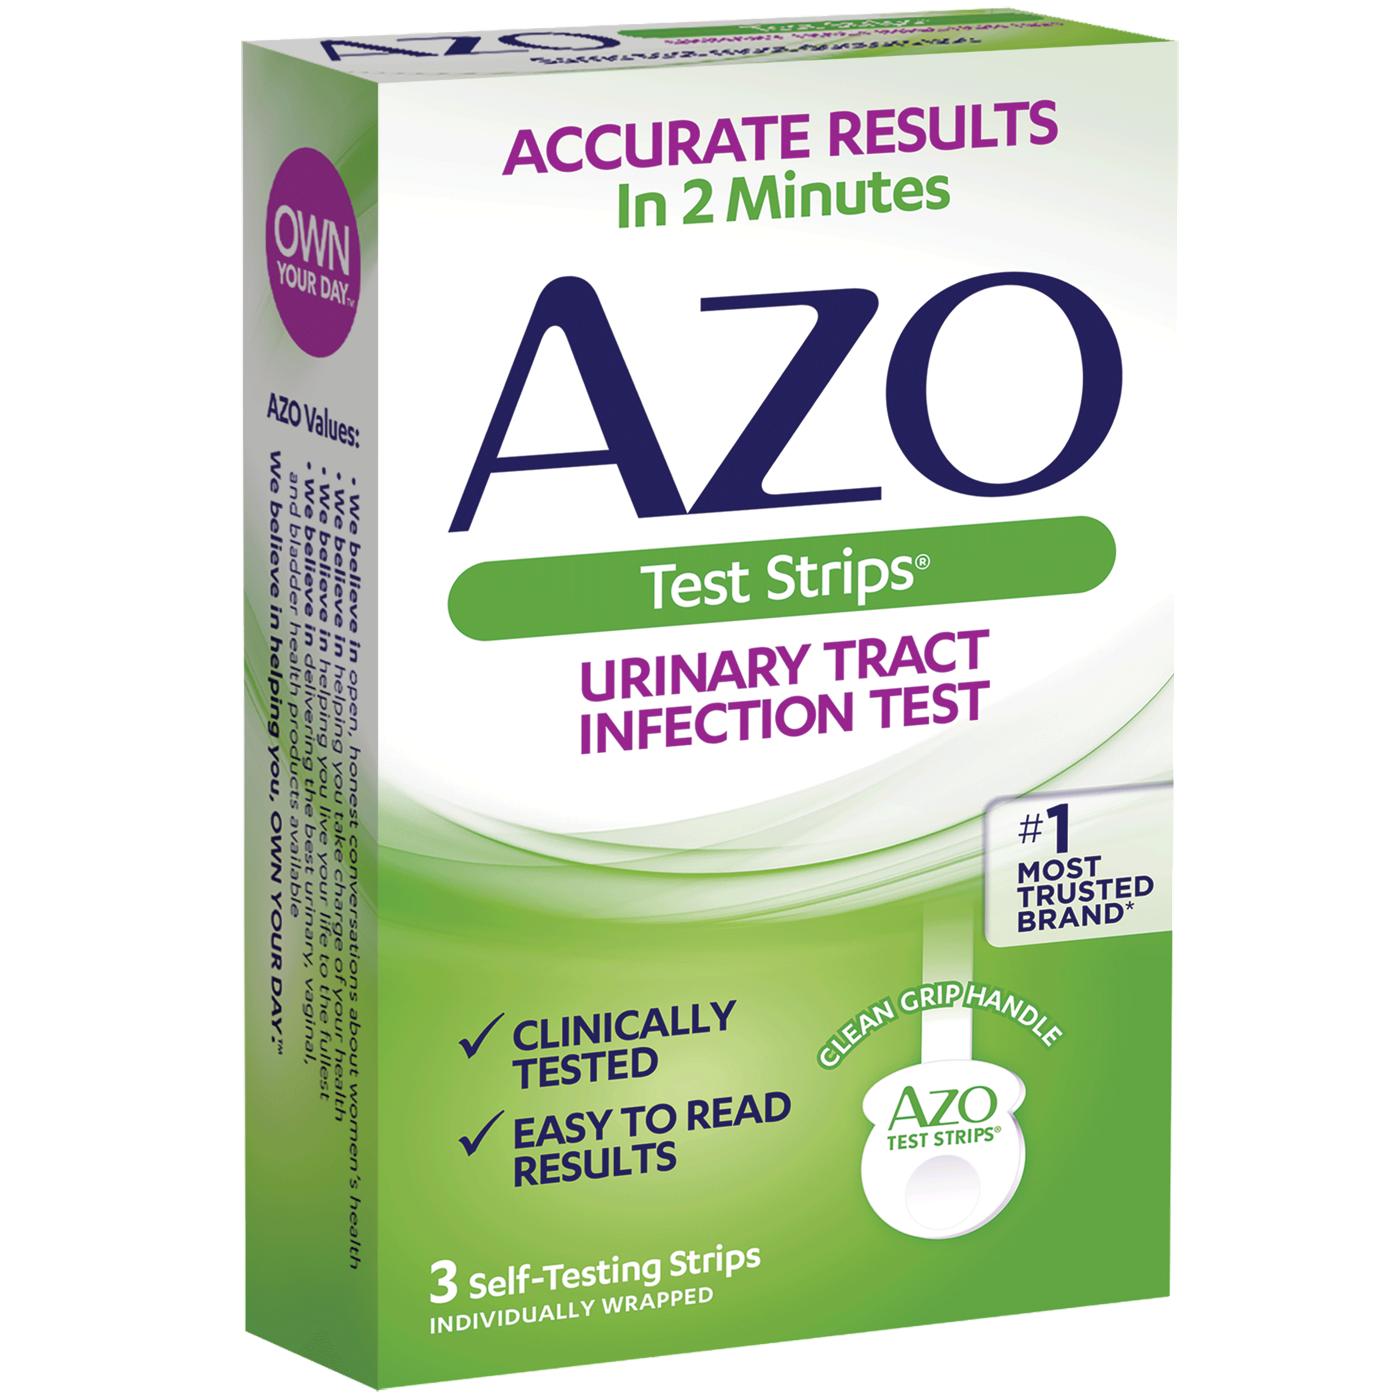 Azo Urinary Tract Infection Test Strips; image 5 of 6